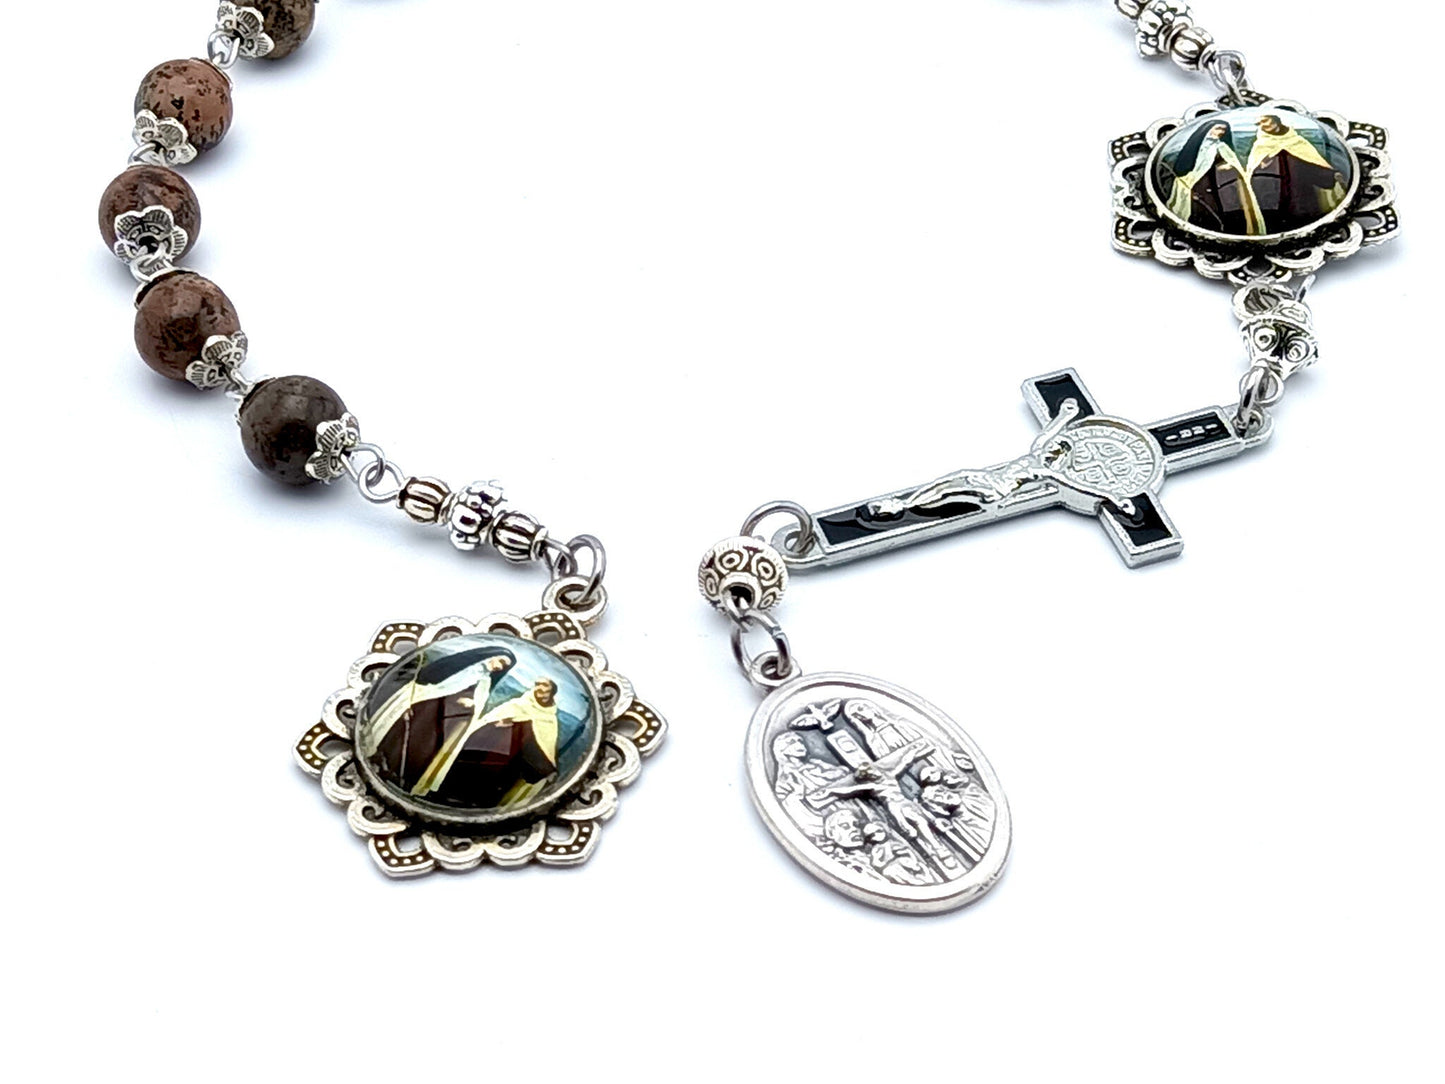 Saint Teresa of Avila unique rosary beads single decade rosary with dark natural gemstone beads, silver and black enamel crucifix and picture centre medal and end medal.